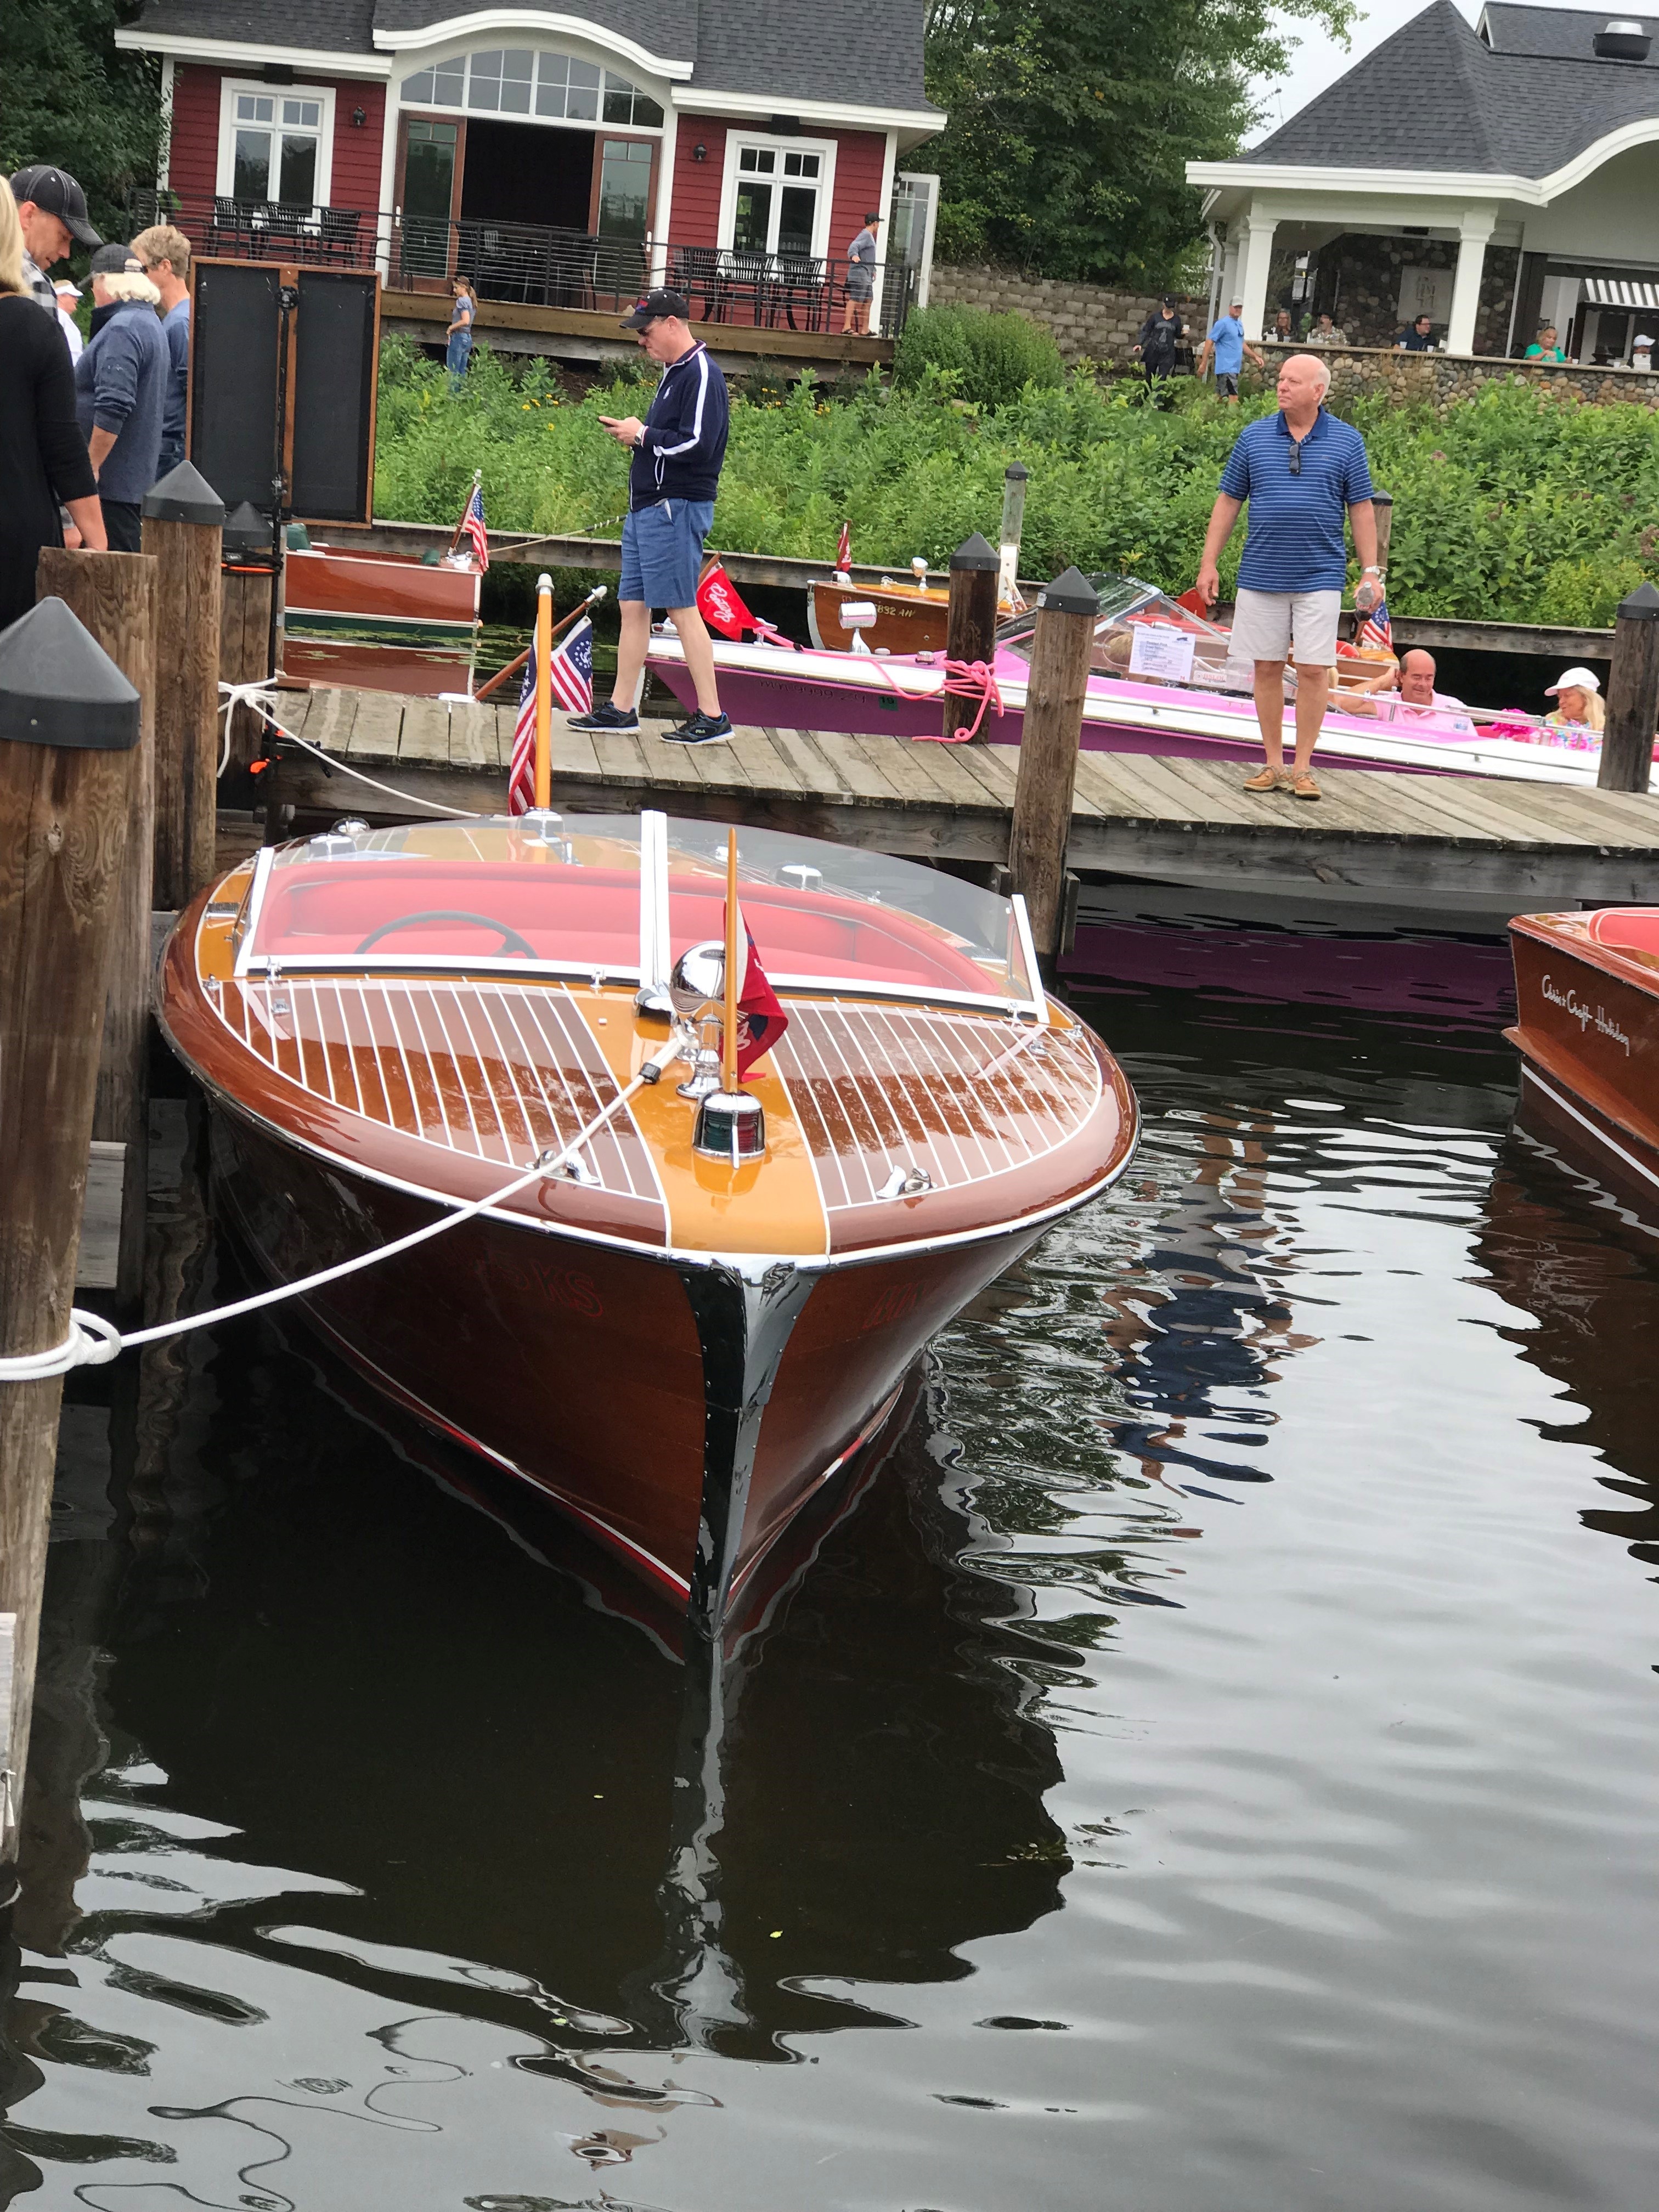 Antique boats between $35,000 and $50,000